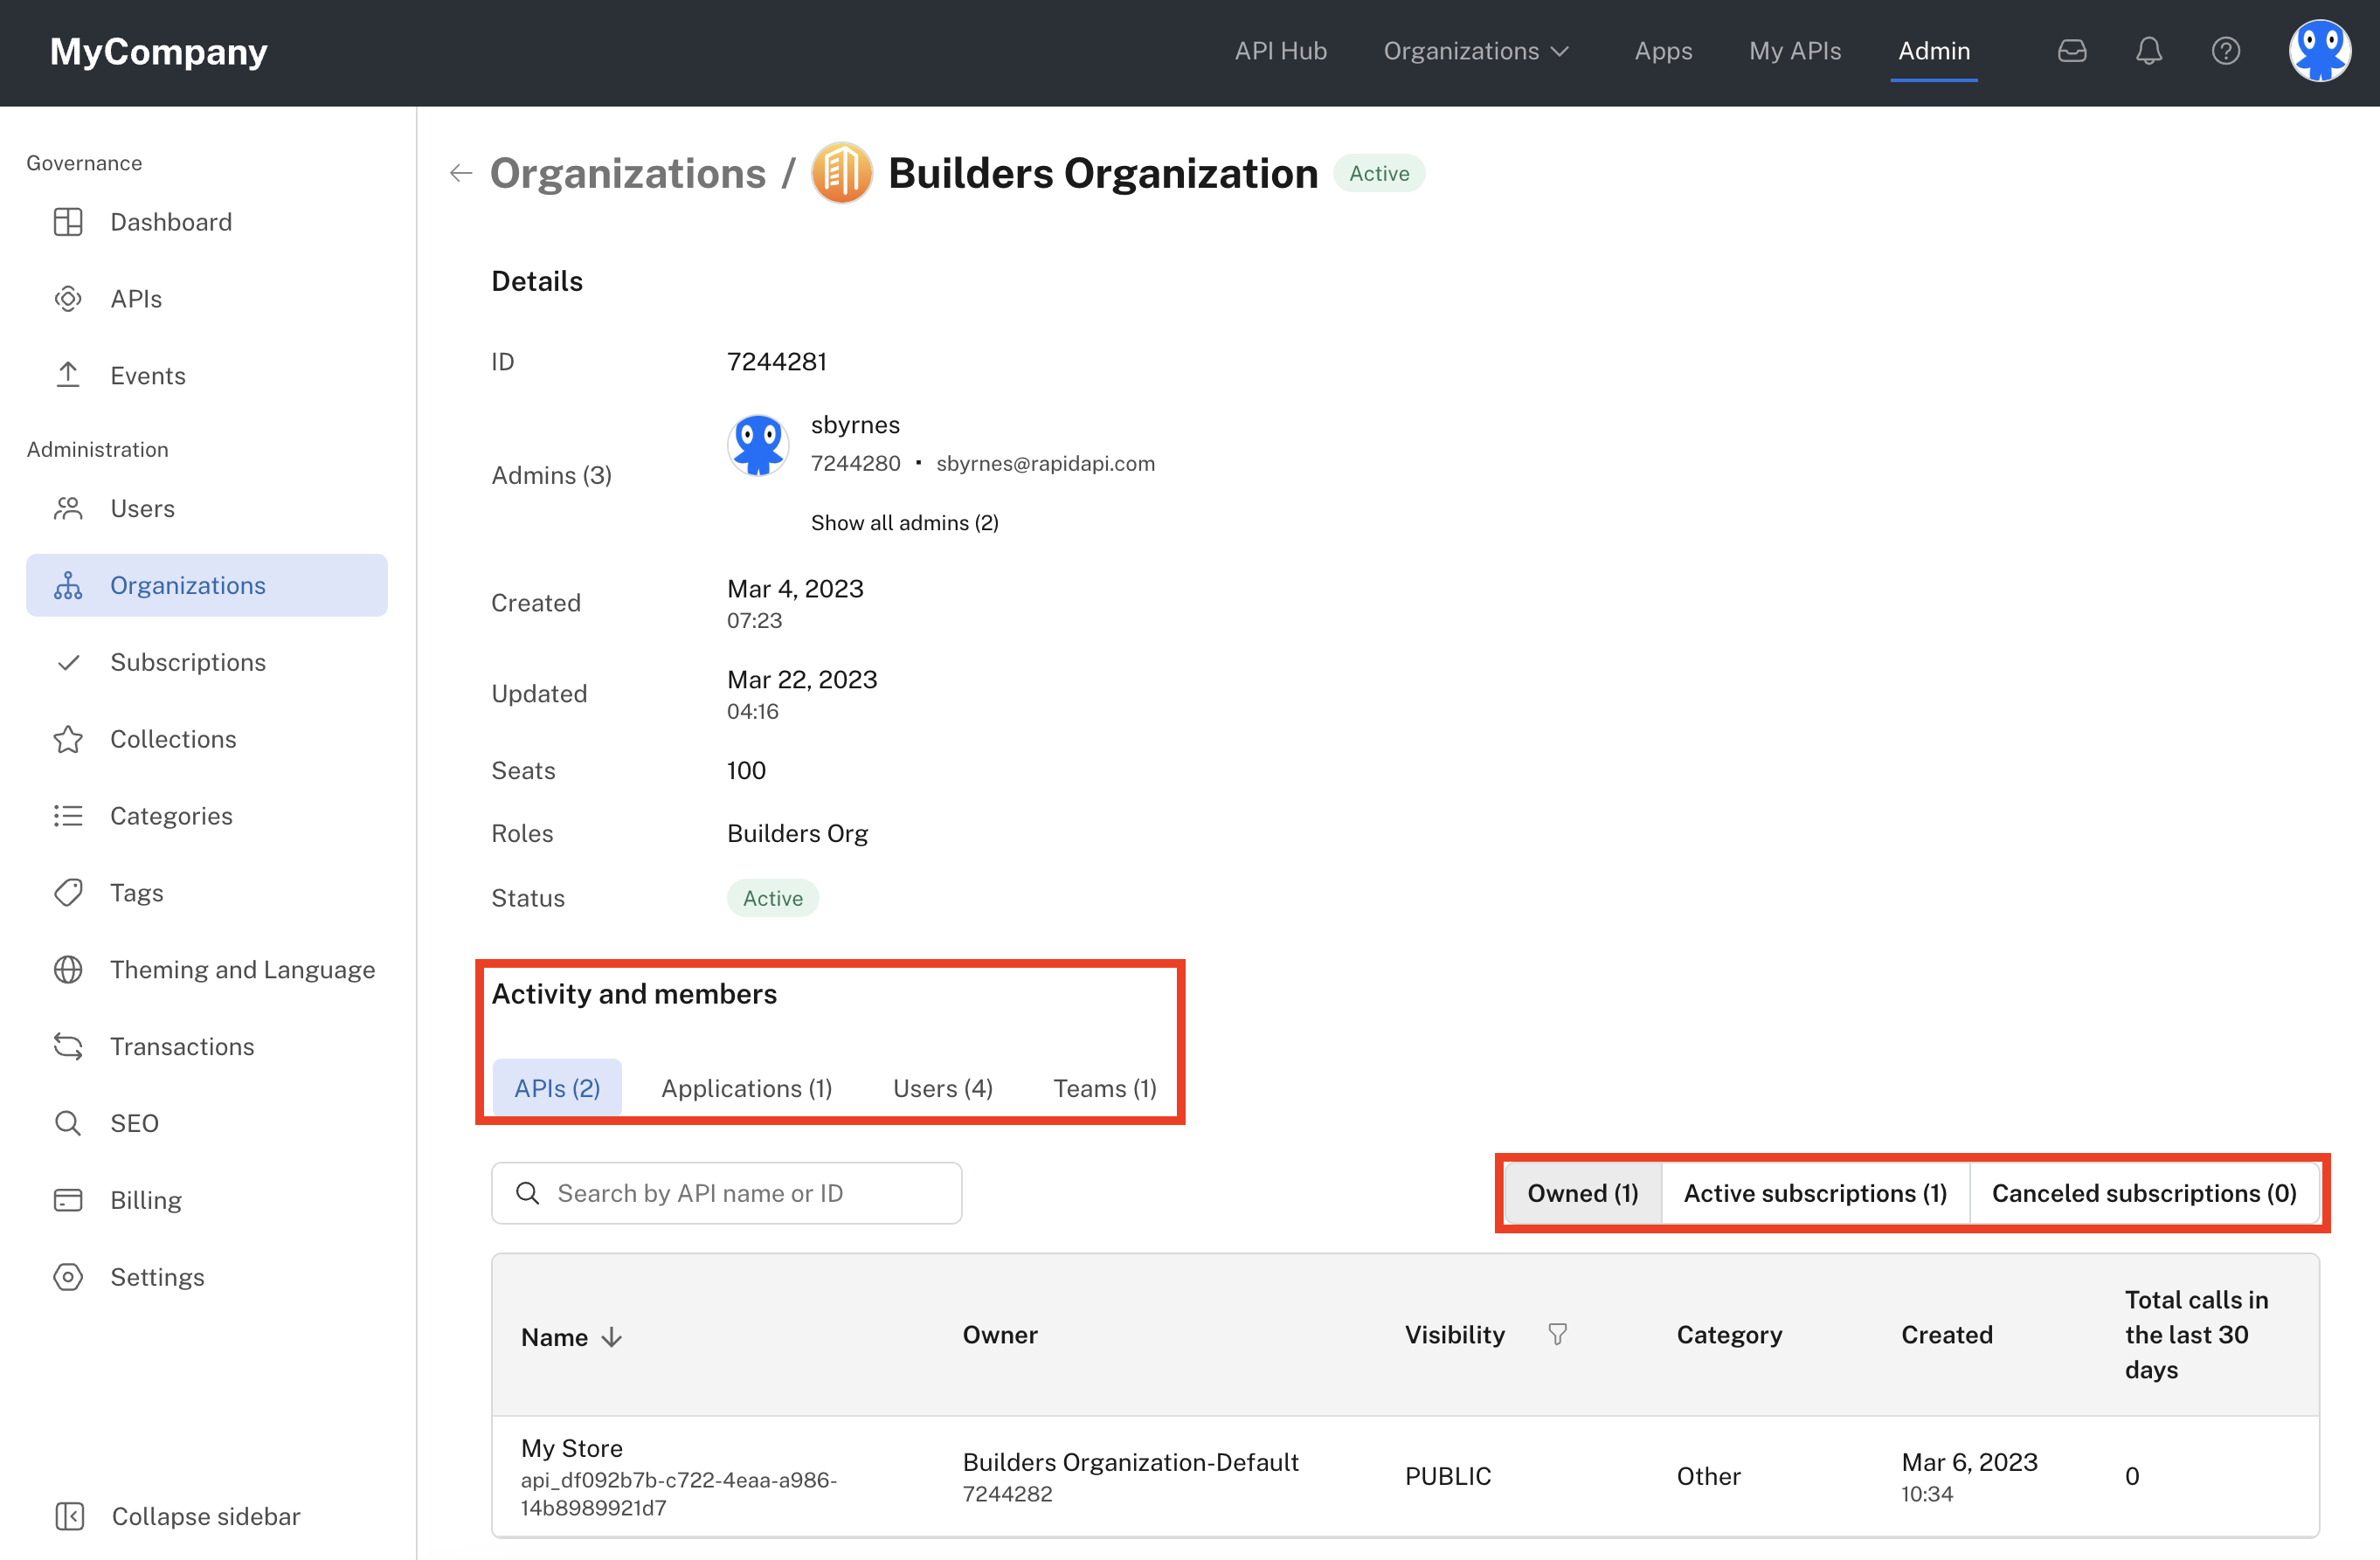 A single organization's details in the Organizations tab of the Admin Panel